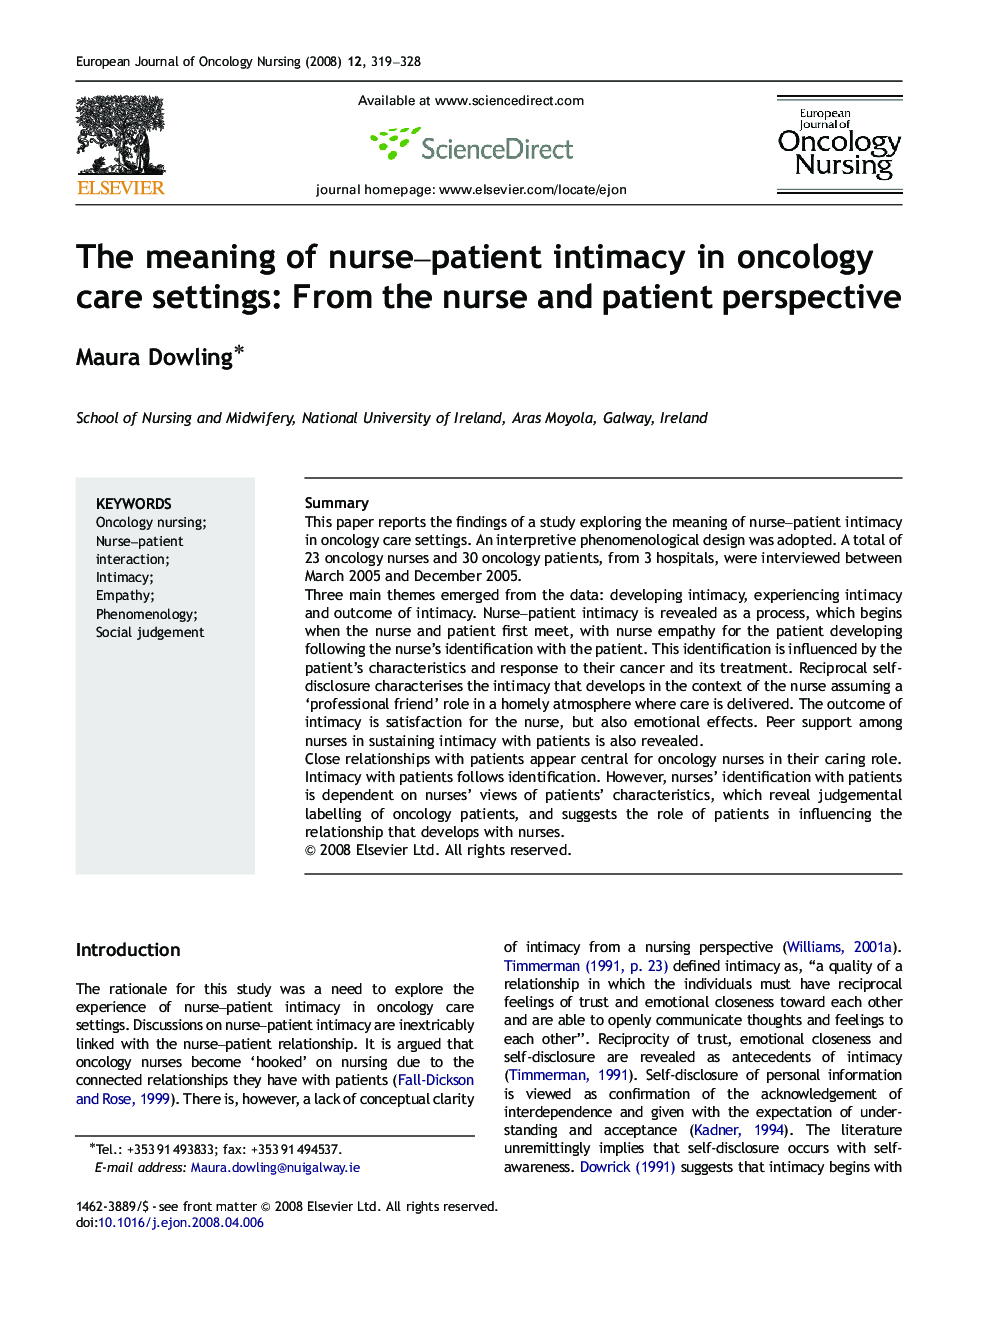 The meaning of nurse–patient intimacy in oncology care settings: From the nurse and patient perspective